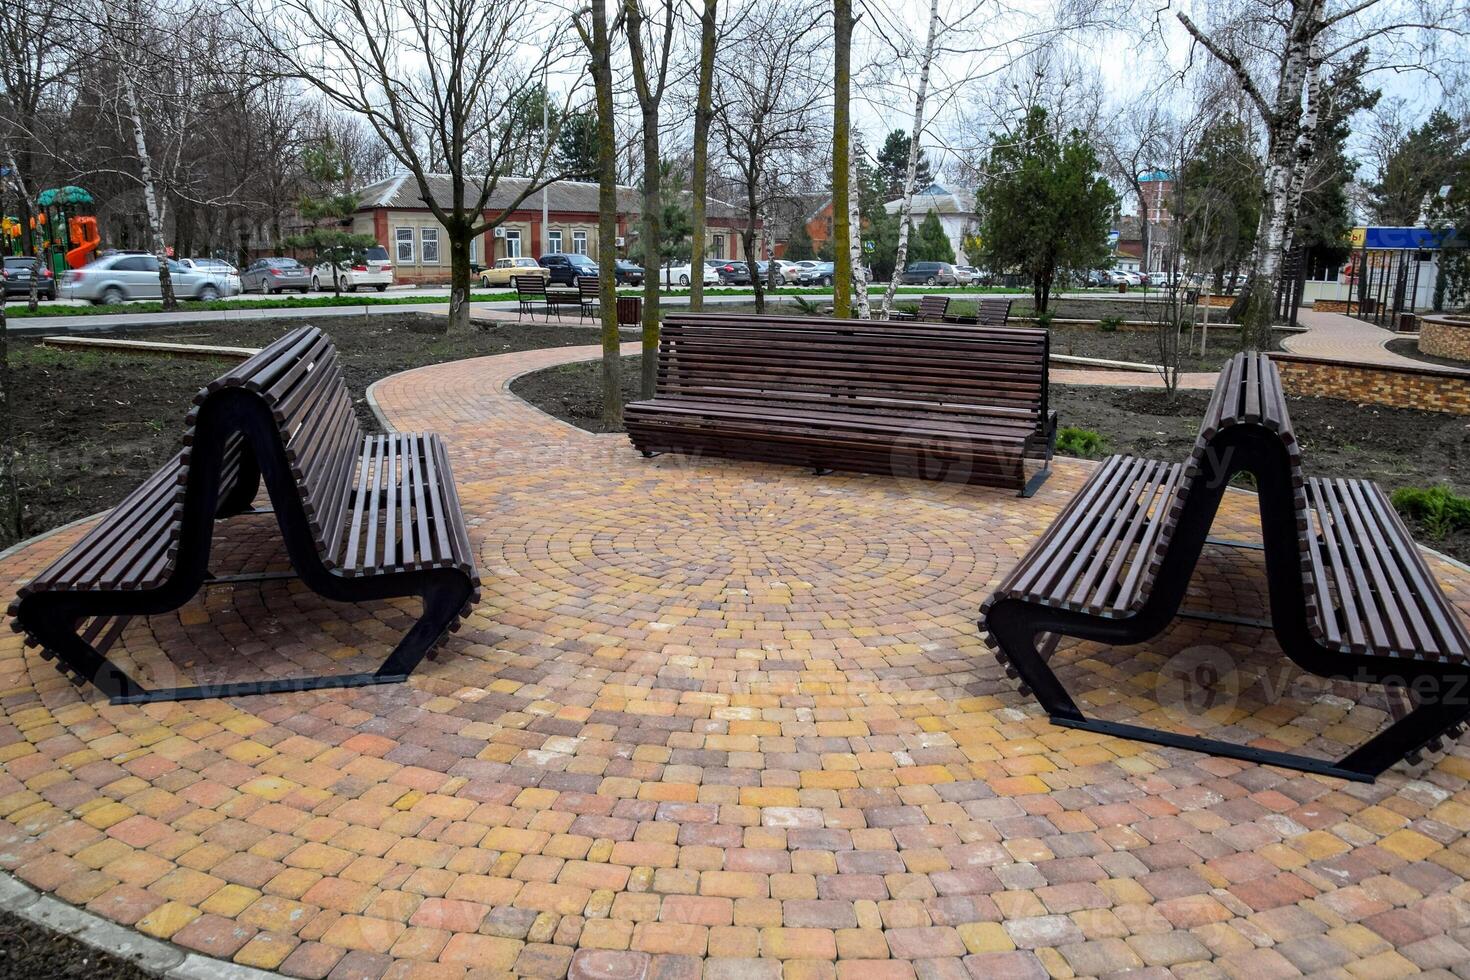 Benches in the park. Sidewalk tile in the park. Infrastructure of leisure in the park photo